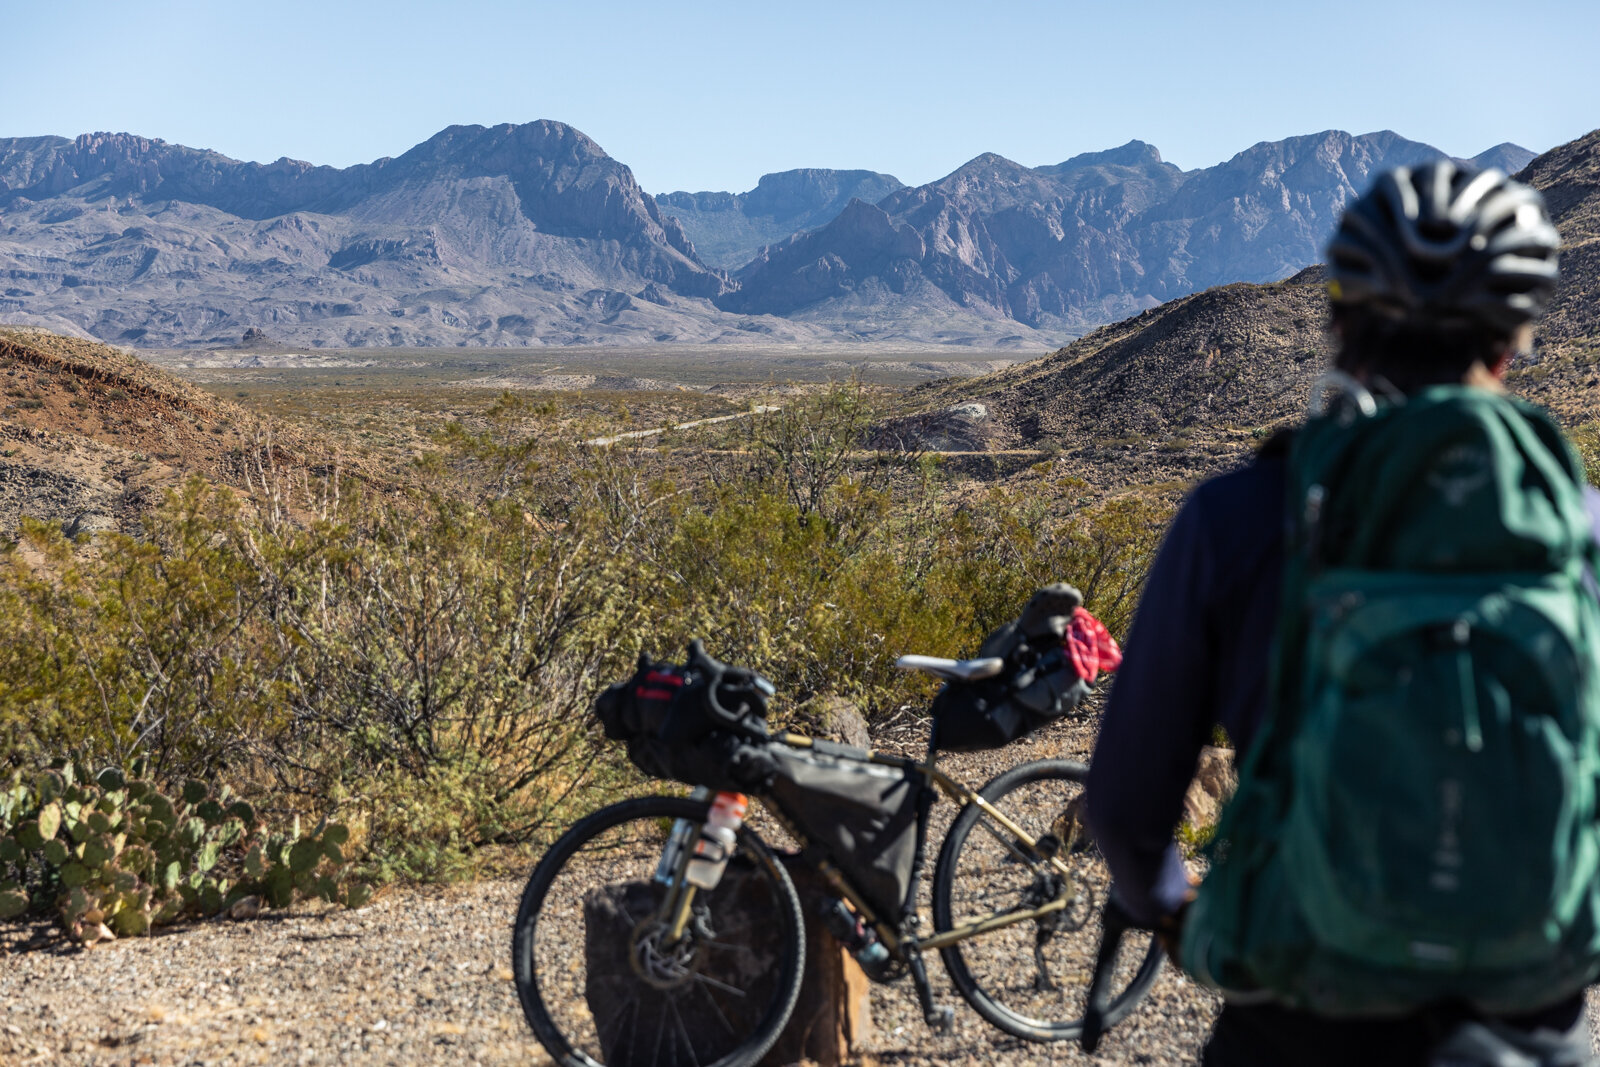  Taking in views of the Chisos Mountains before a ripping paved descent.  